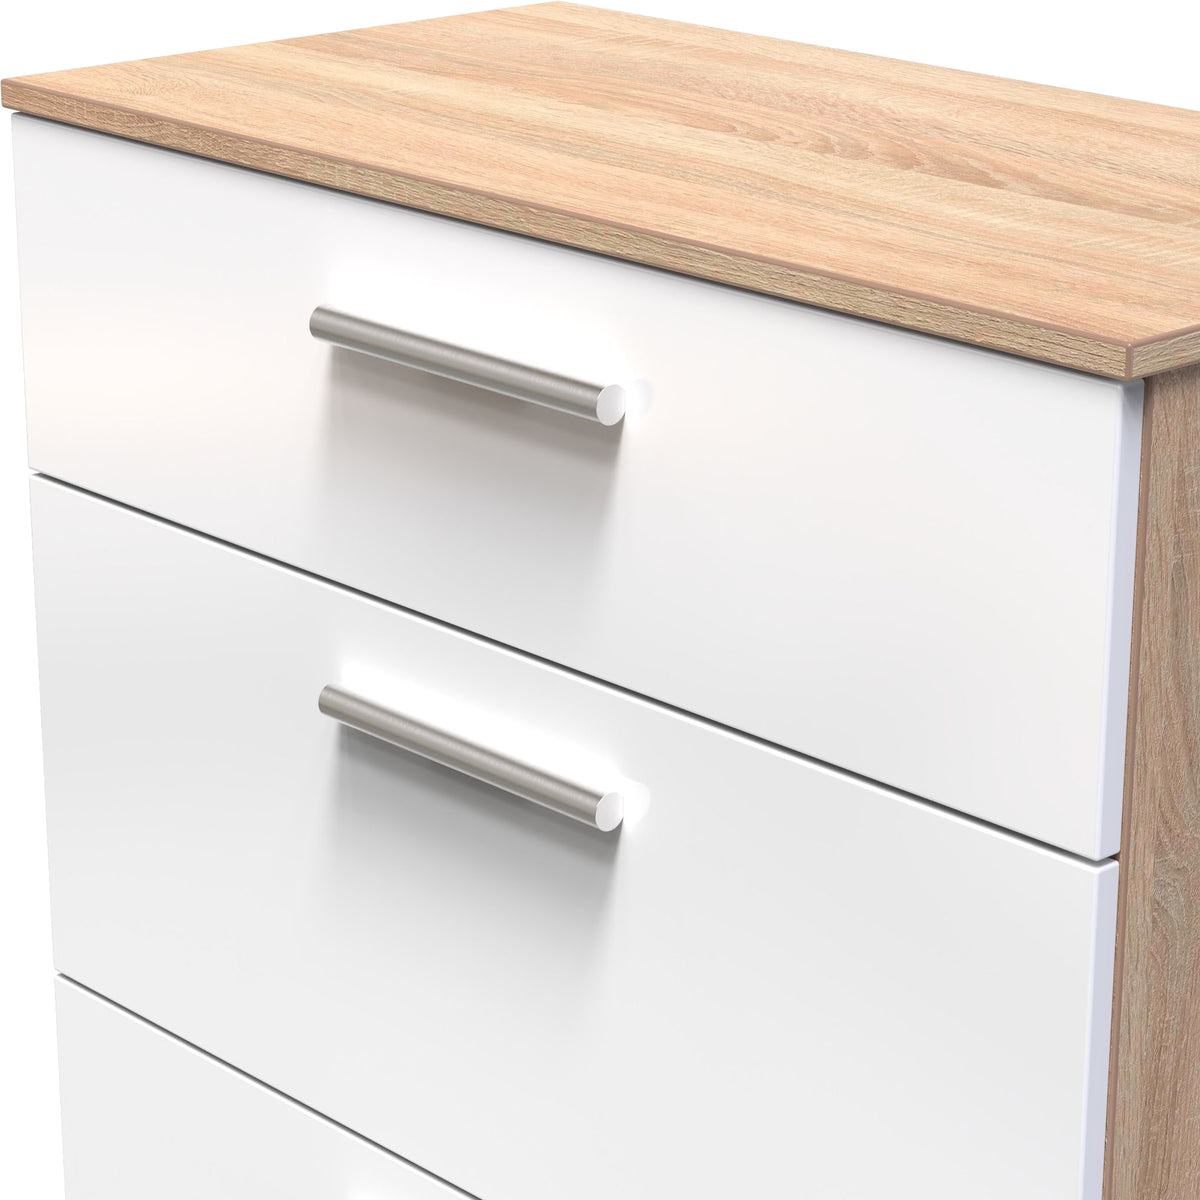 Blakely White Light Wood 3 Drawer Deep Chest from Roseland Furniture